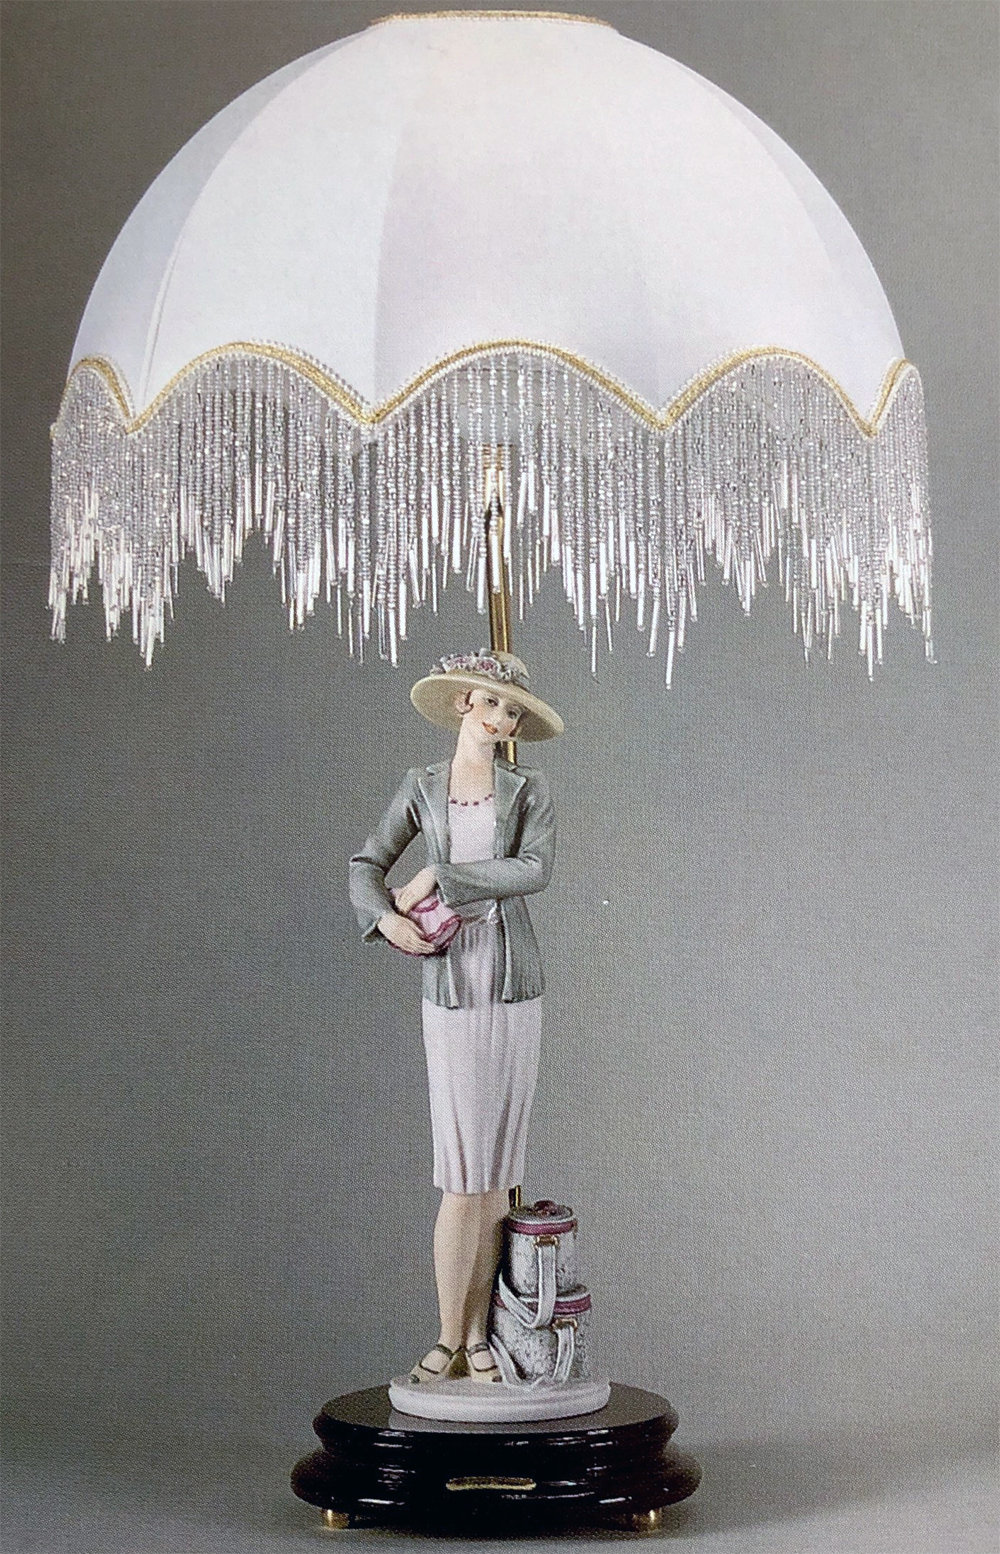 Giuseppe Armani Mable Lamp (Lamp shade not included) 691CBL Open Edition  Sculpture.